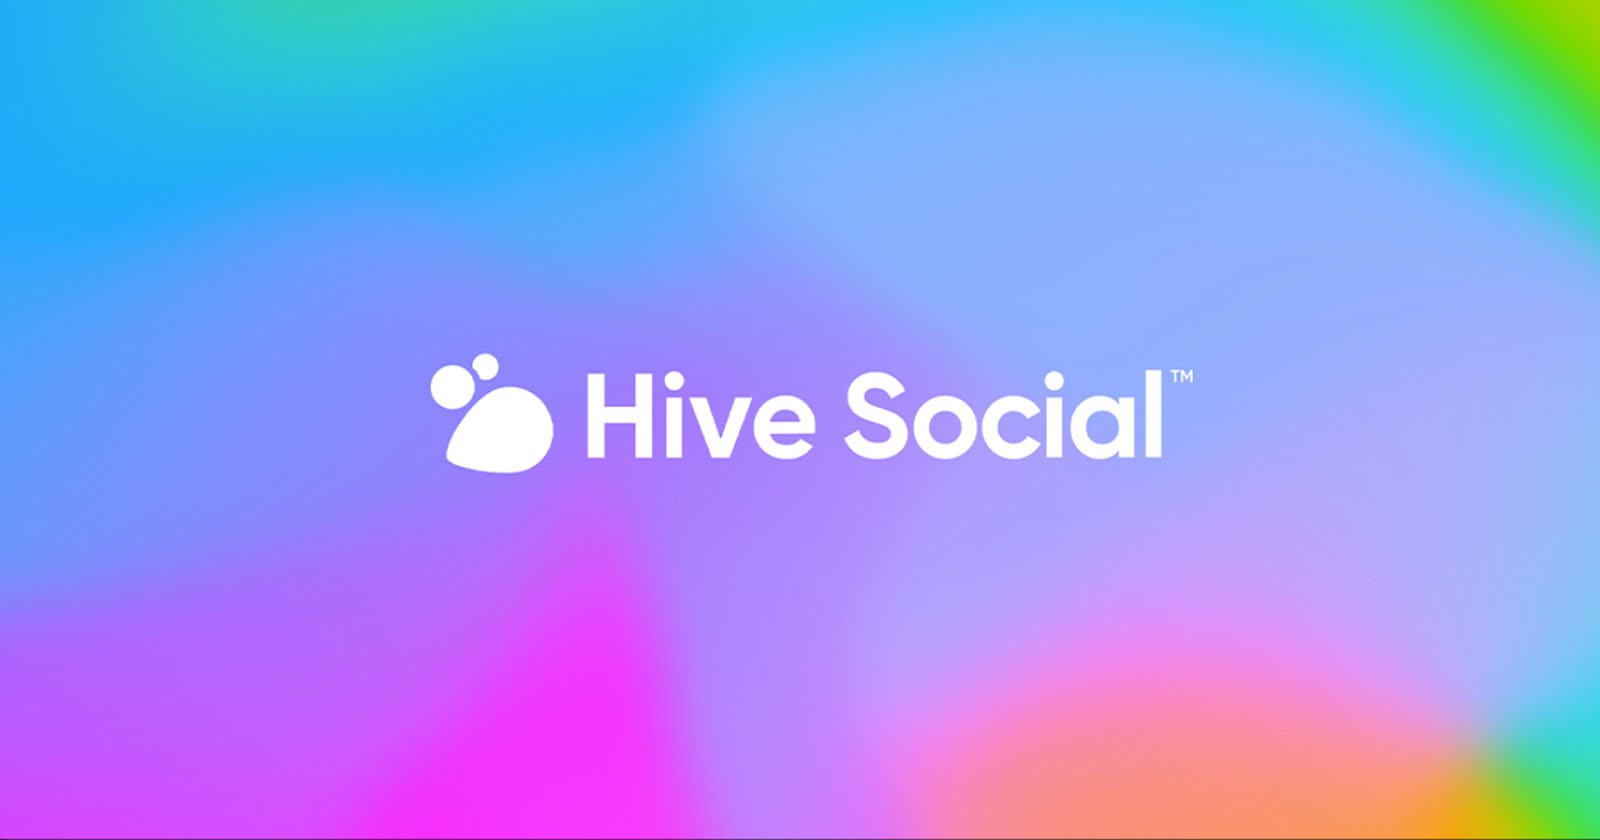  hive social shuts down app due security issues 